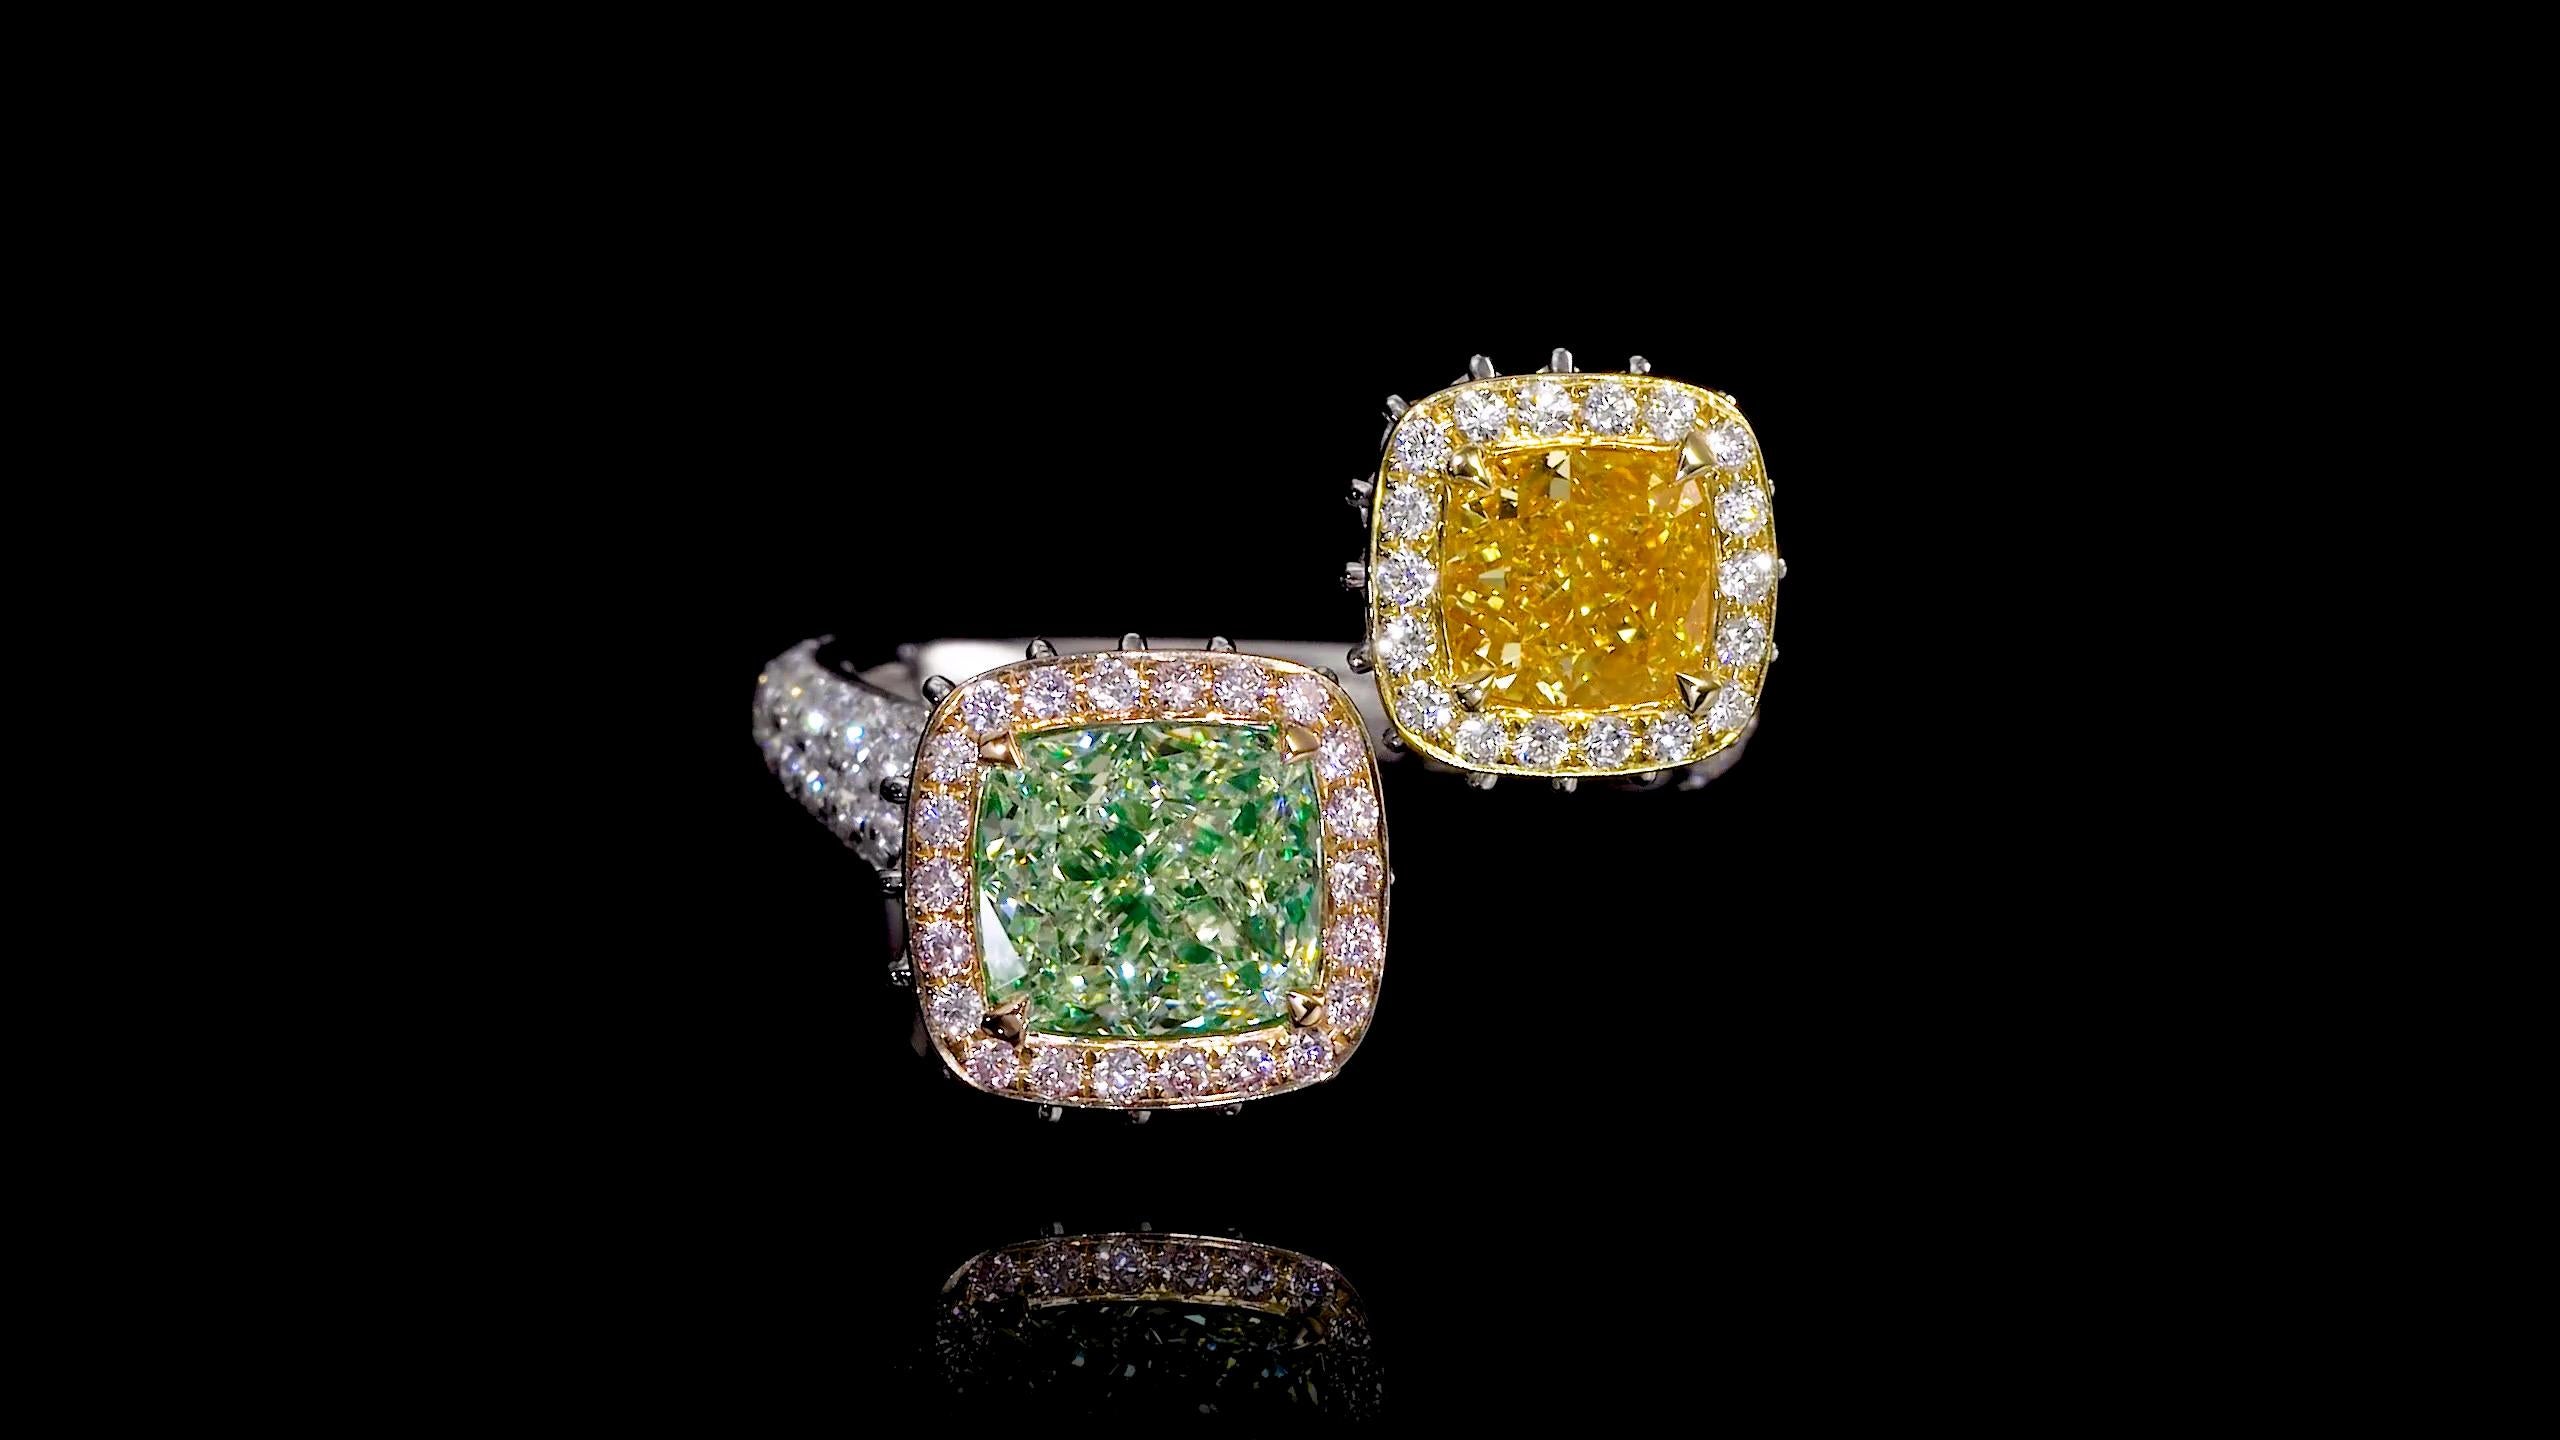 Another hand made masterpiece from the Museum Vault At Emilio Jewelry, located on New York's iconic Fifth Avenue. This Ring features two extraordinary natural diamonds
center 1: Gia certified natural fancy intense orangey yellow 1ct +
center 2: Gia